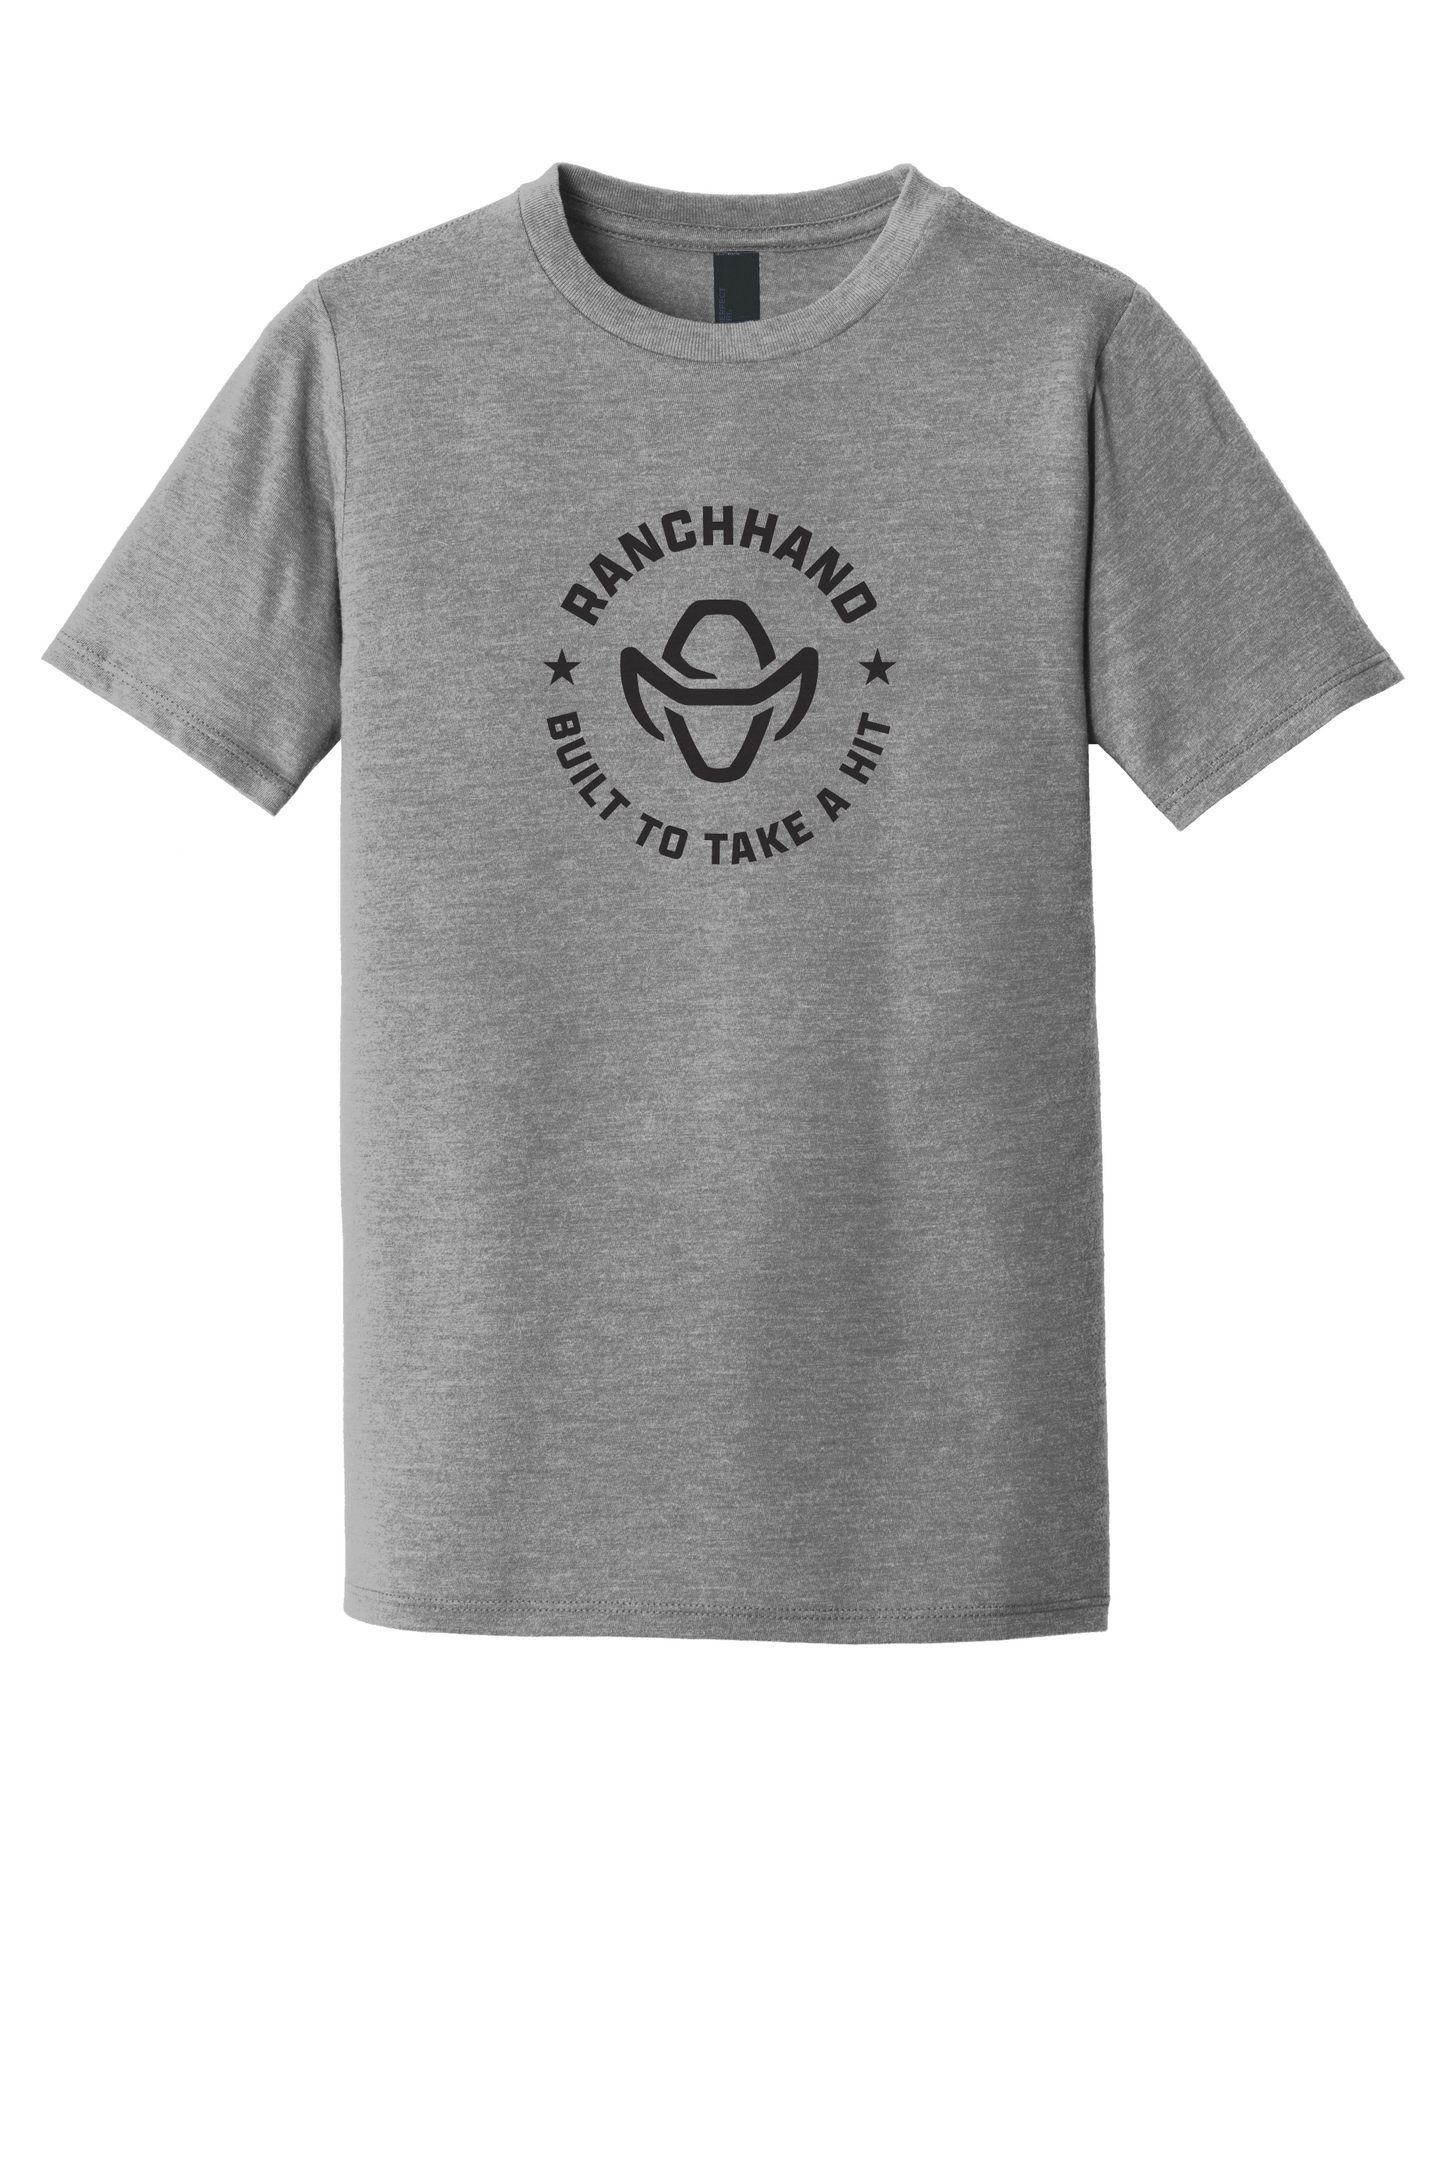 Grey Ranch Hand Built to Take a Hit Youth T-shirt